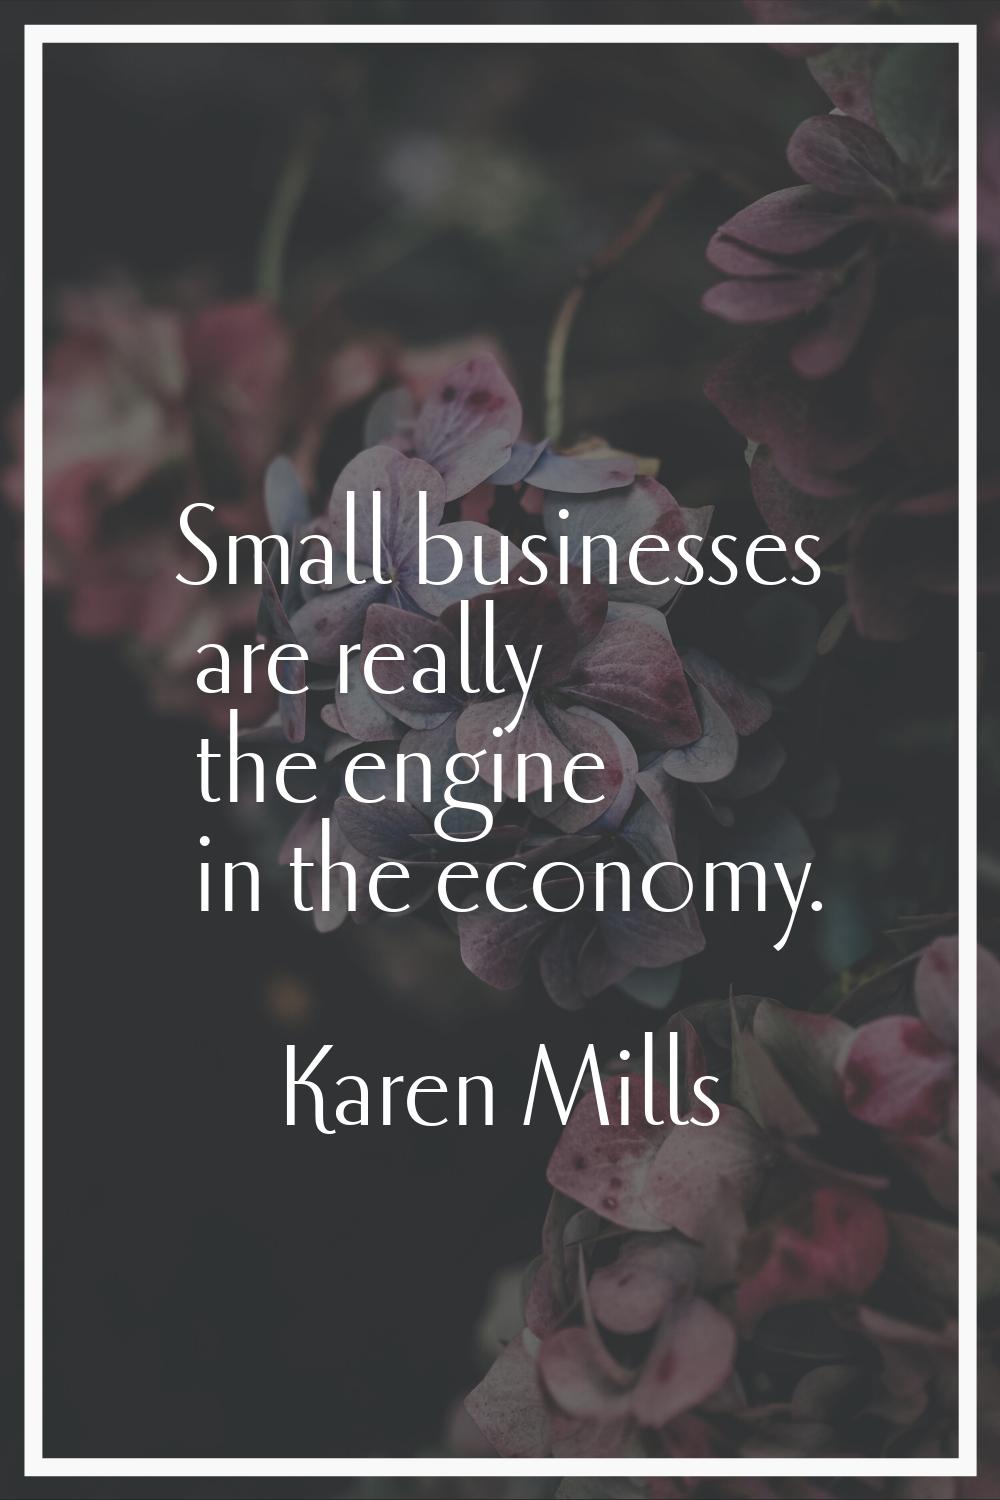 Small businesses are really the engine in the economy.